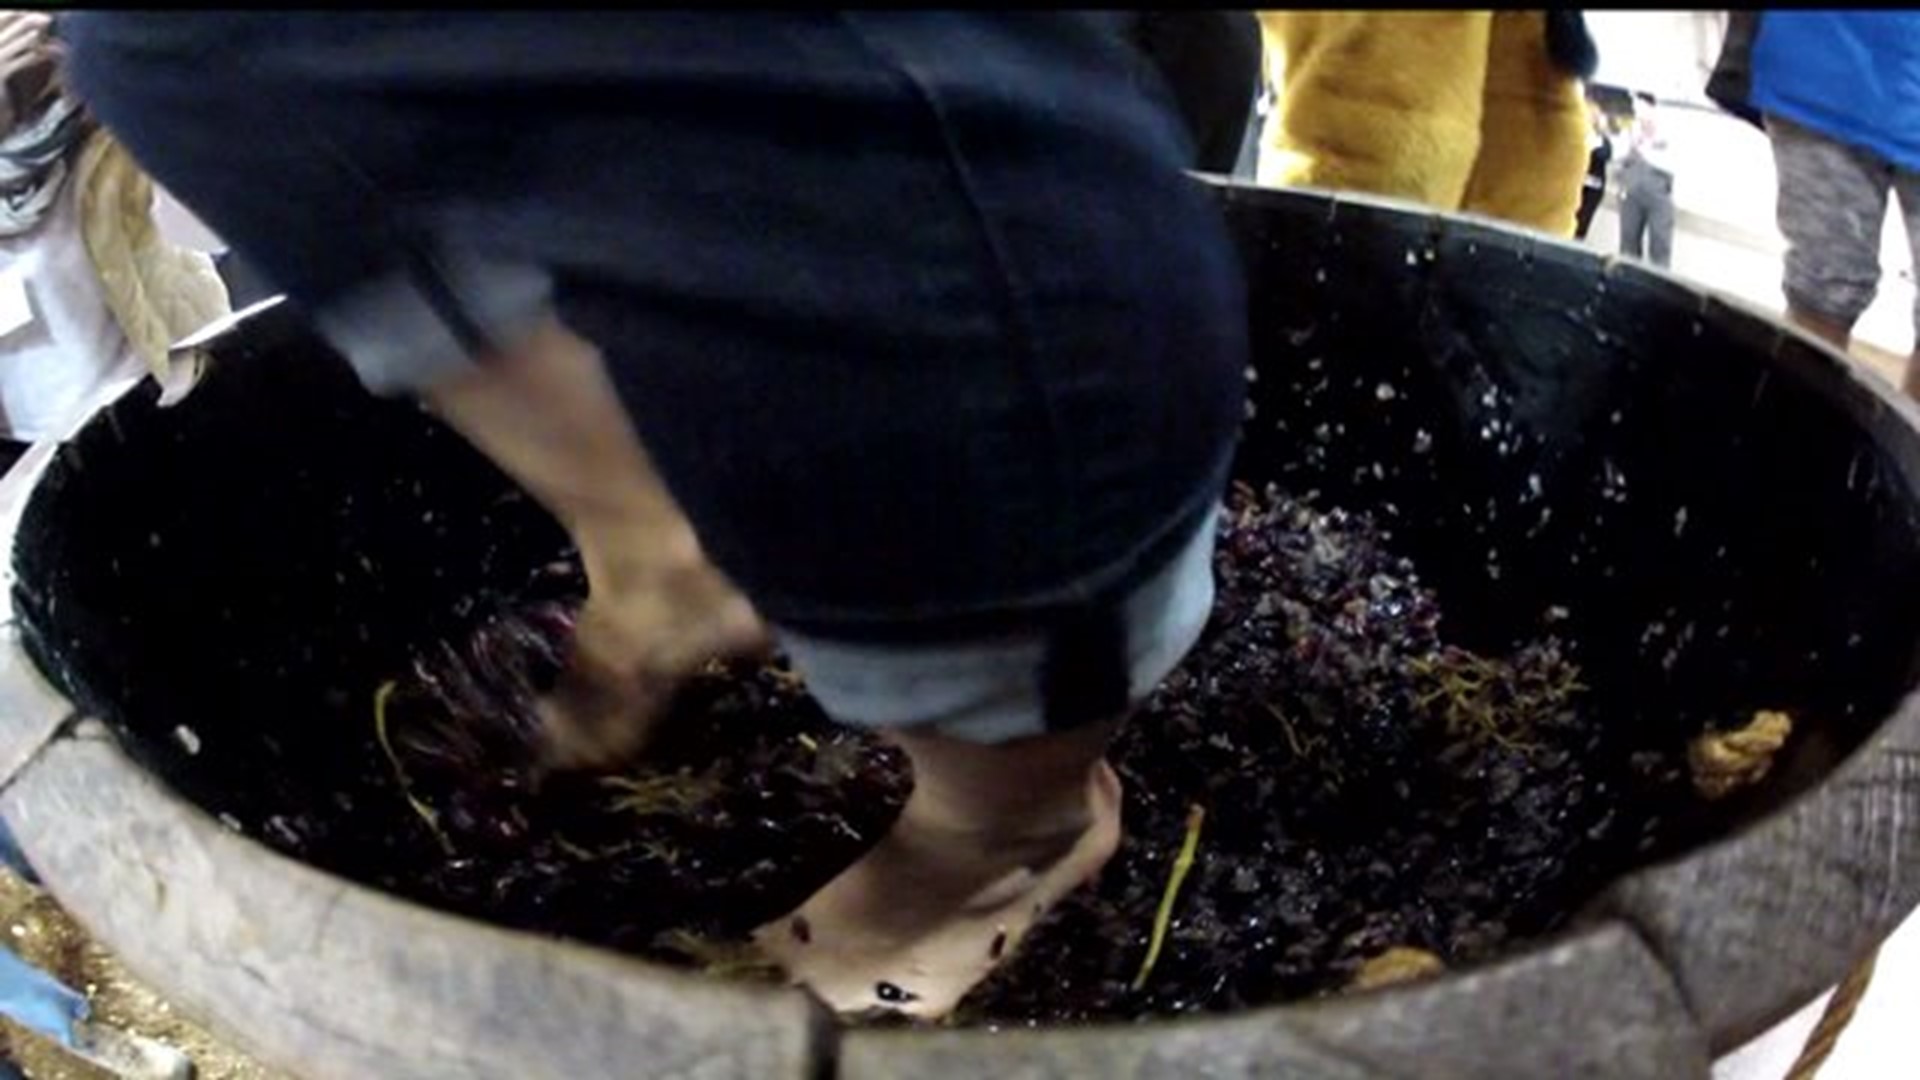 The Great Grape Stomp at the 2015 PA Farm Show